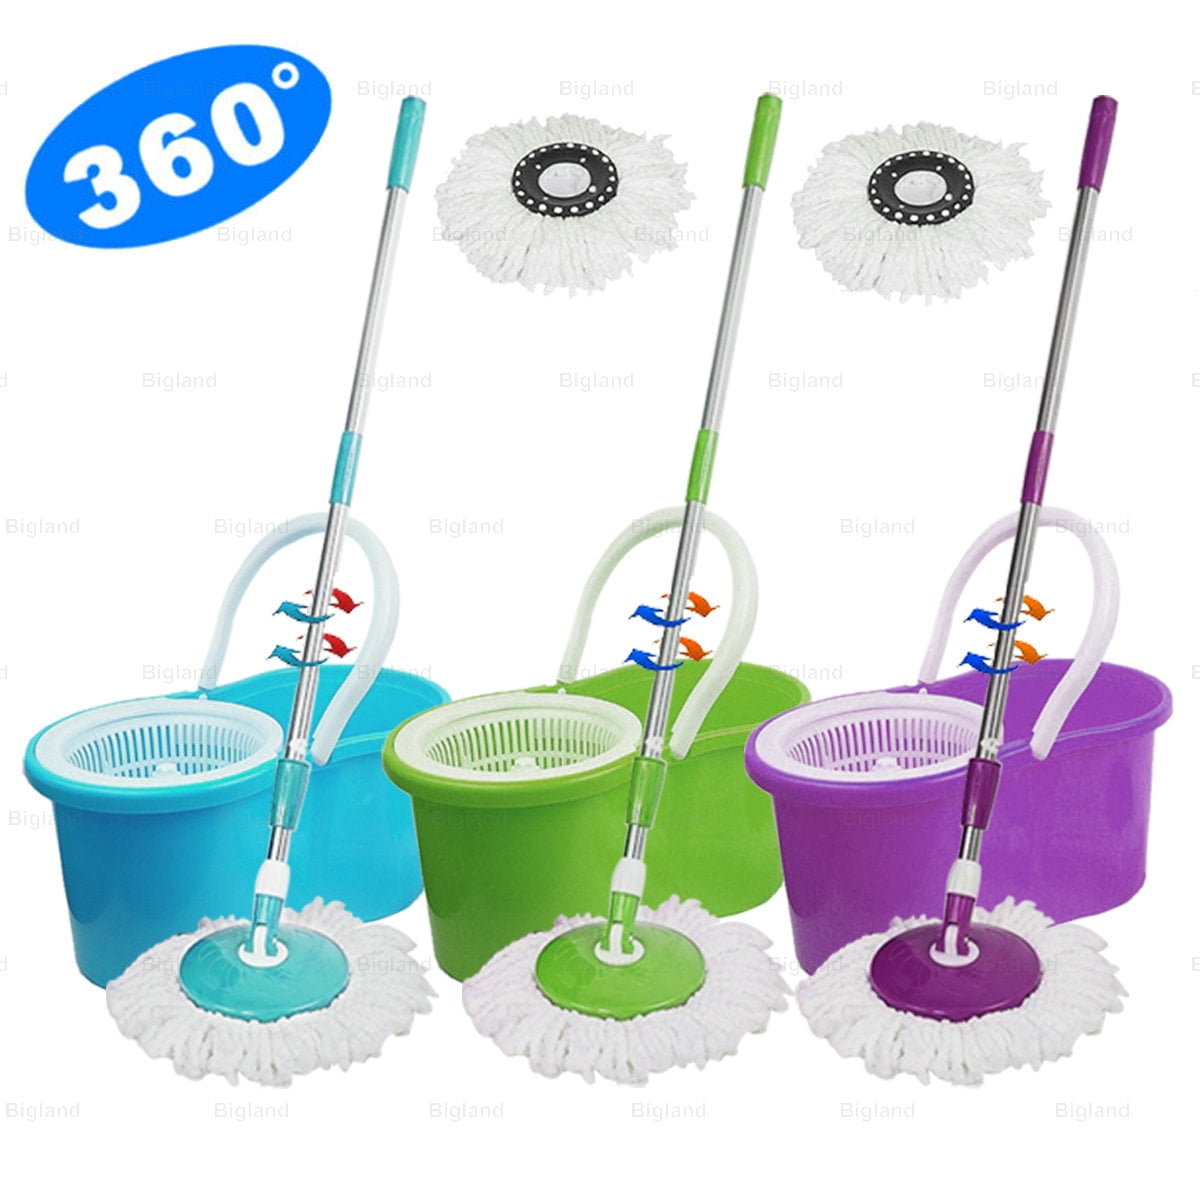 360° Floor Magic Spin Mop Bucket Set Microfiber Rotating Dry Heads With 2 Heads 